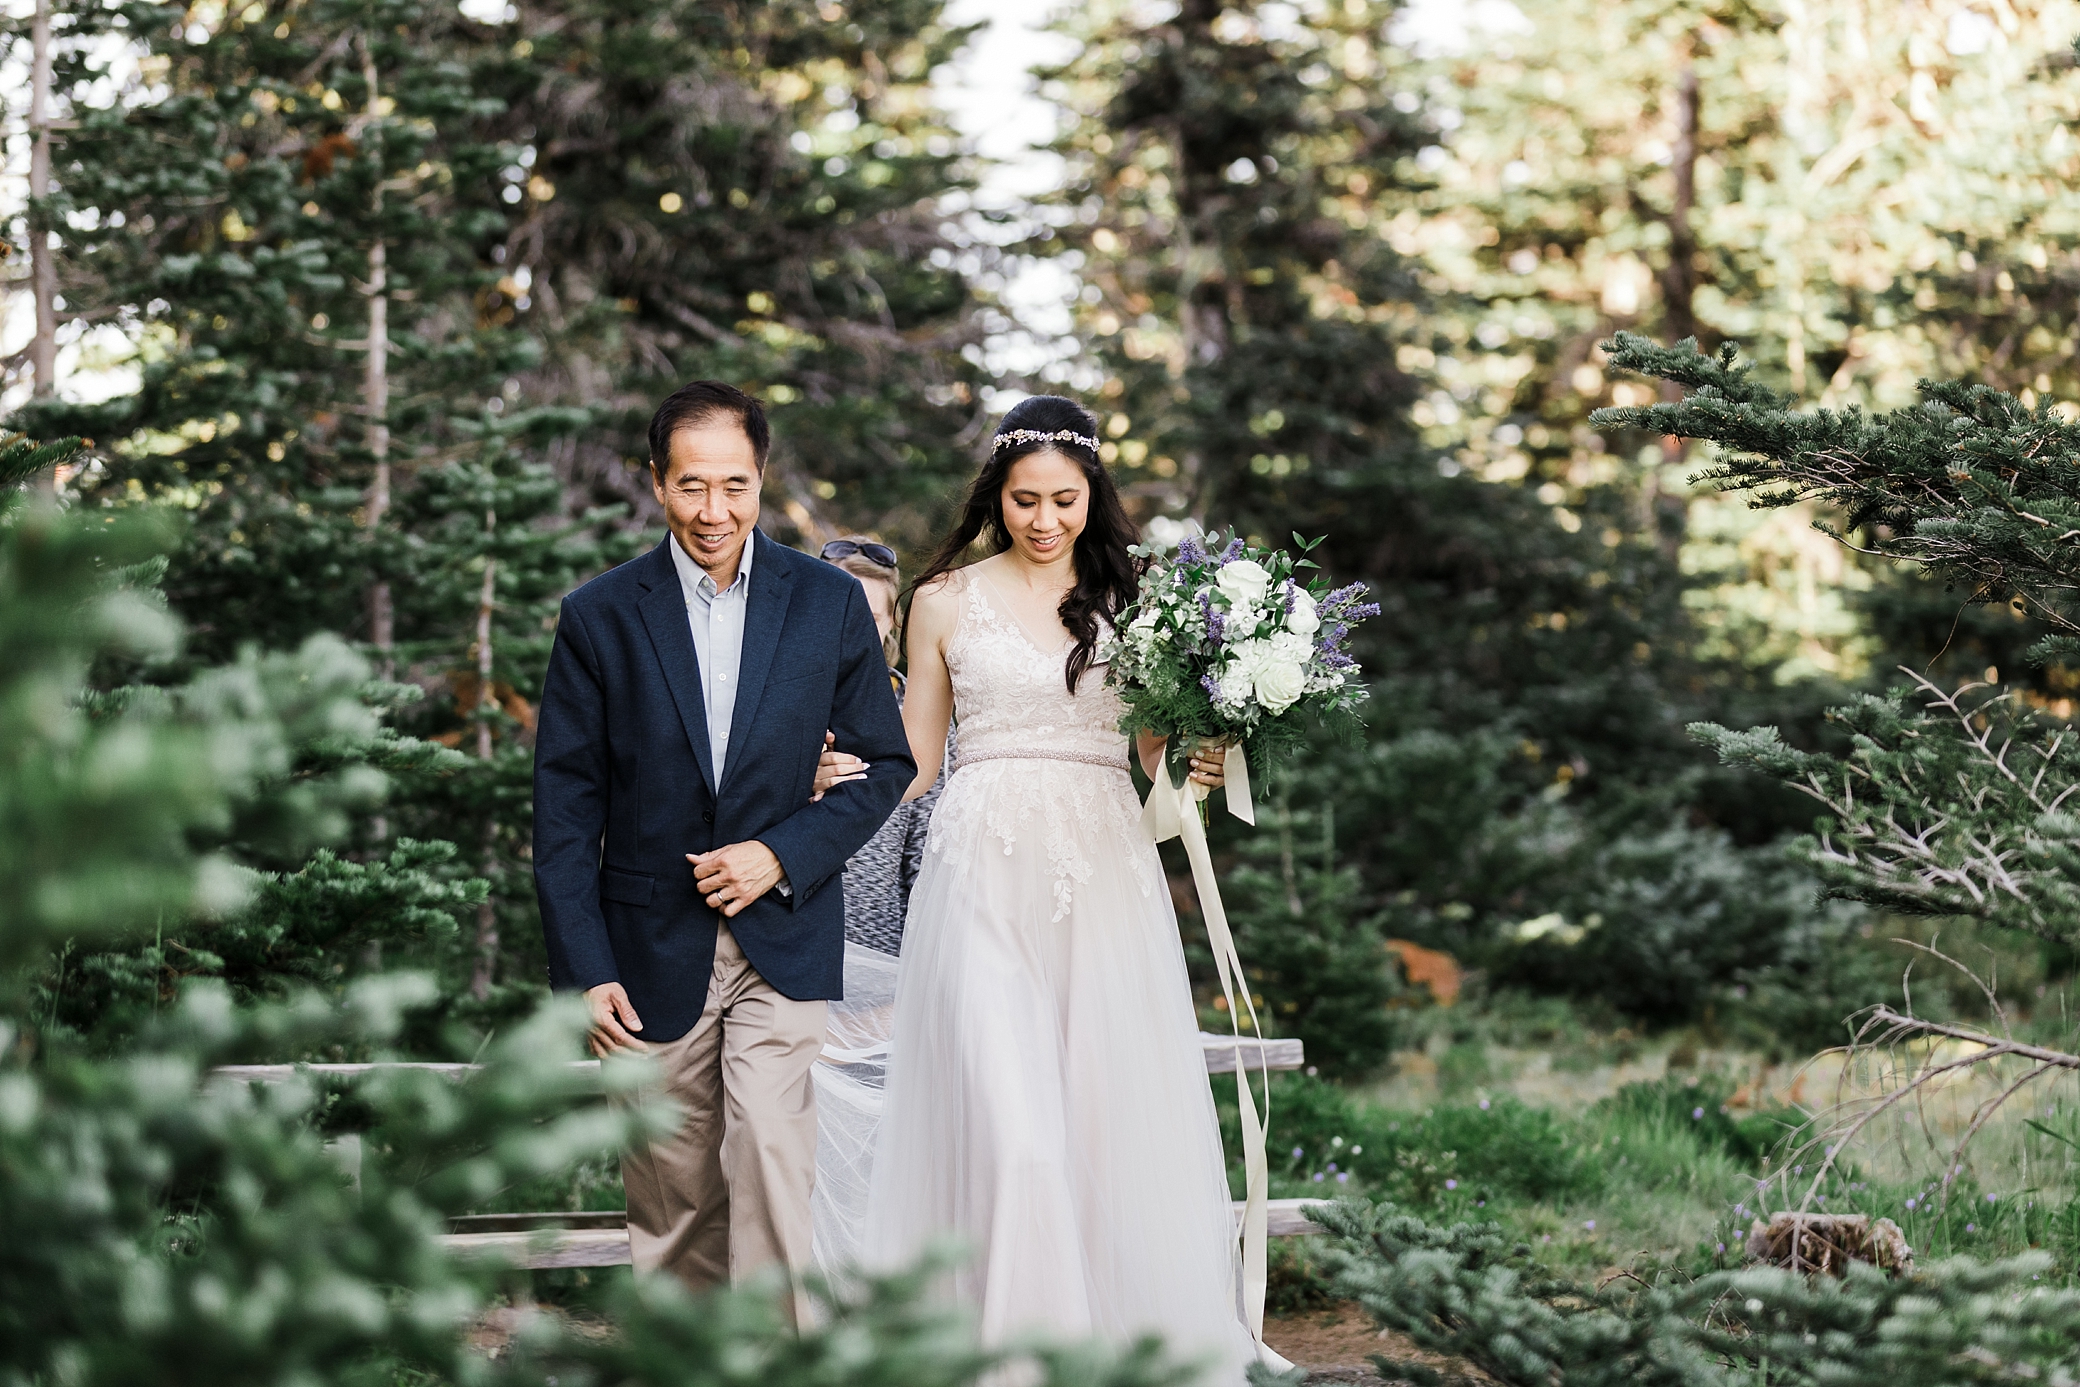 Bride's father walking her down the aisle at Hurricane Ridge for intimate elopement ceremony | Megan Montalvo Photography 